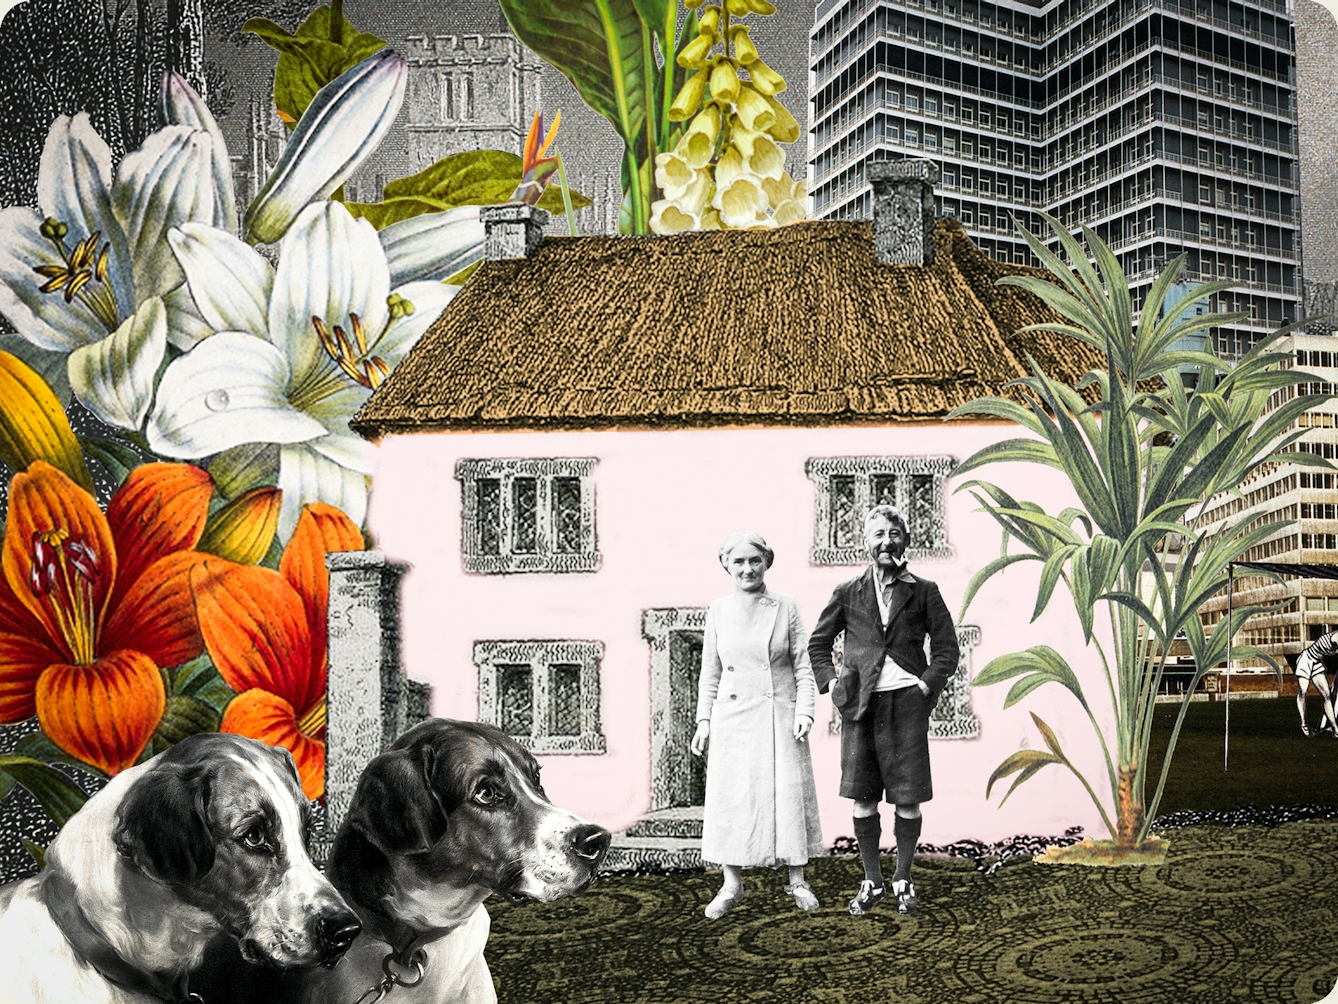 Artwork using collage. The collaged elements are made up archive material which includes, vintage photographs, etchings, painted illustrations, lithographic prints and line drawings. This artwork depicts a house, in front of which stands an elderly couple. The house is surrounded by large colourful drawings of flowers and trees. Behind the house in the distance is a skyline of tall tower blocks. In the foreground are the heads of two dogs with doleful eyes.